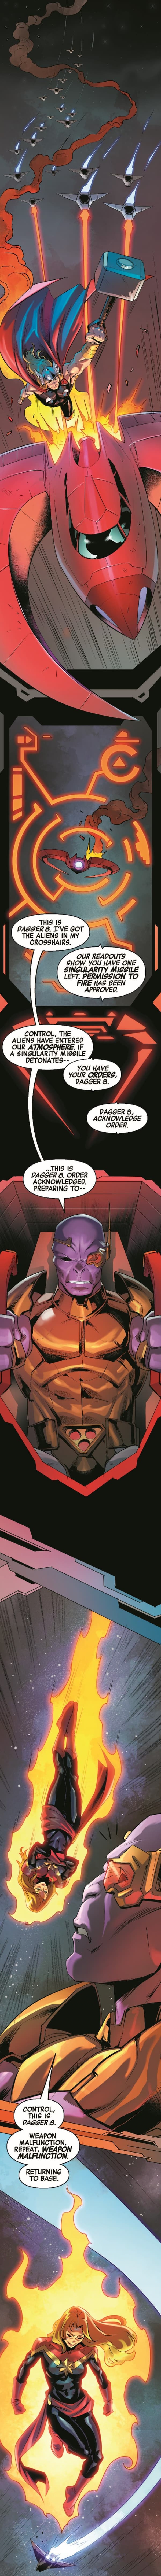 AVENGERS UNITED INFINITY COMIC (2023) #21 by Derek Landy and Davide Tinto